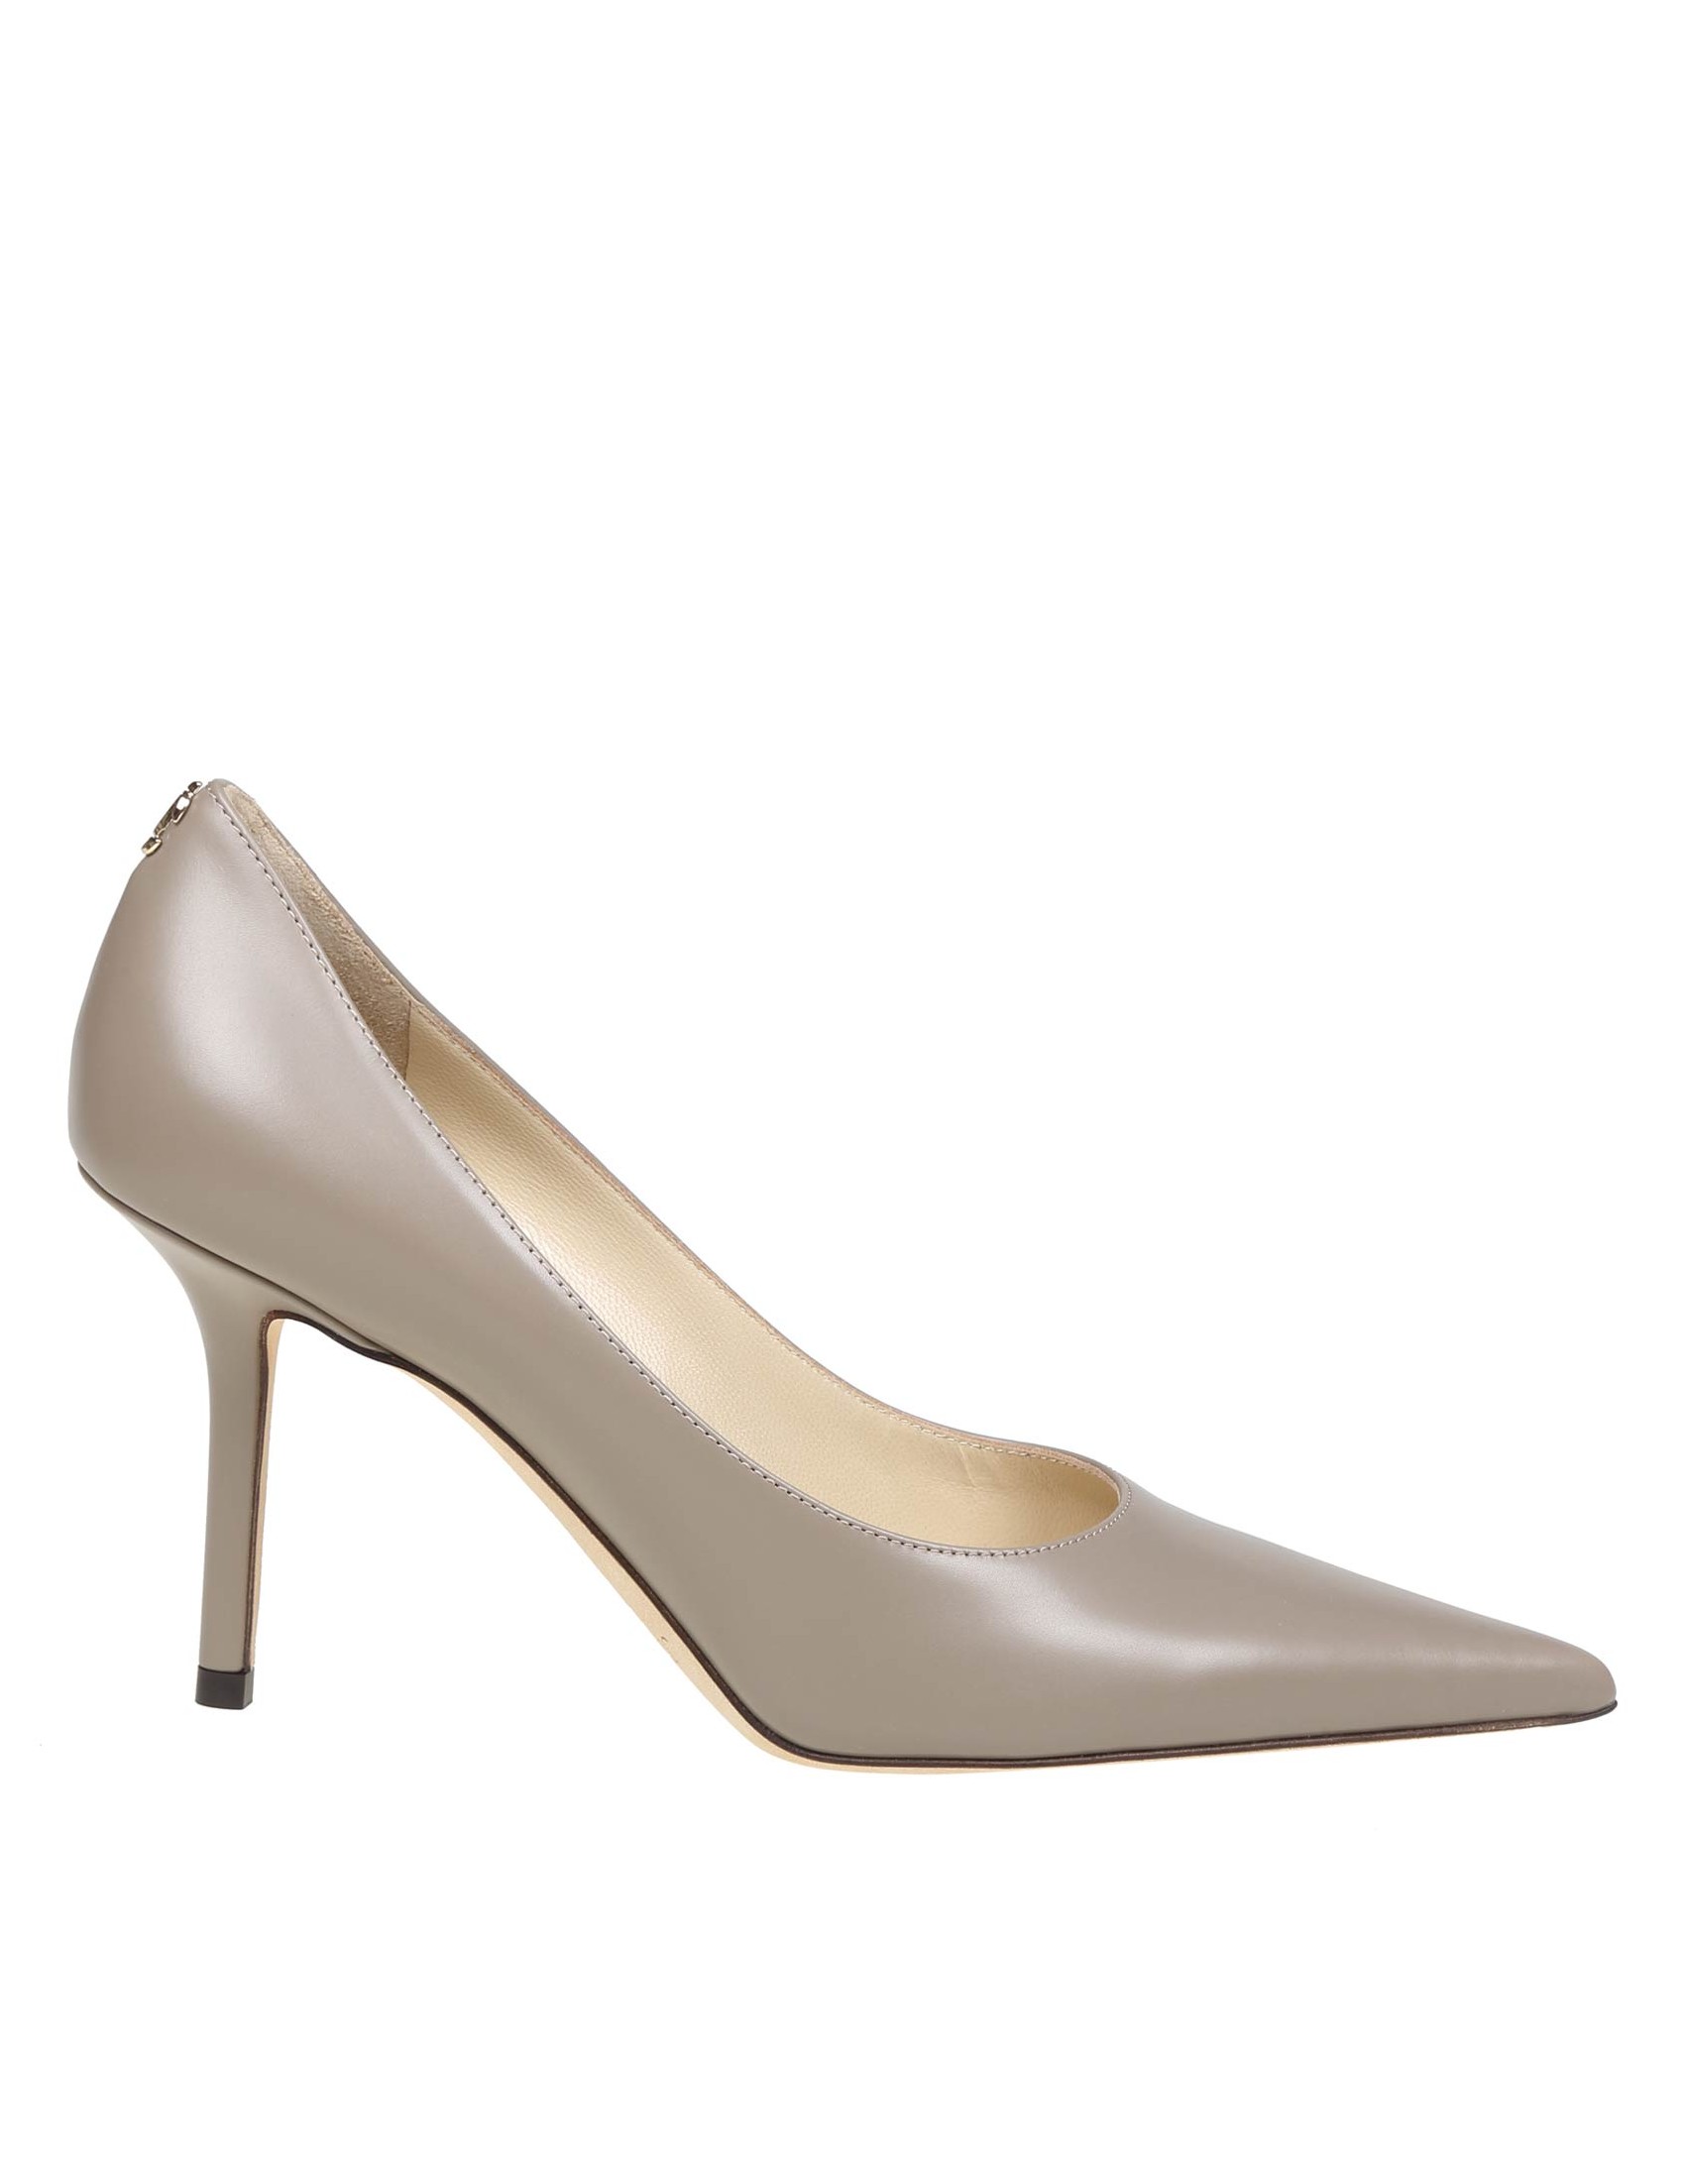 JIMMY CHOO PUMP LOVE 85 IN TAUPE COLOR LEATHER